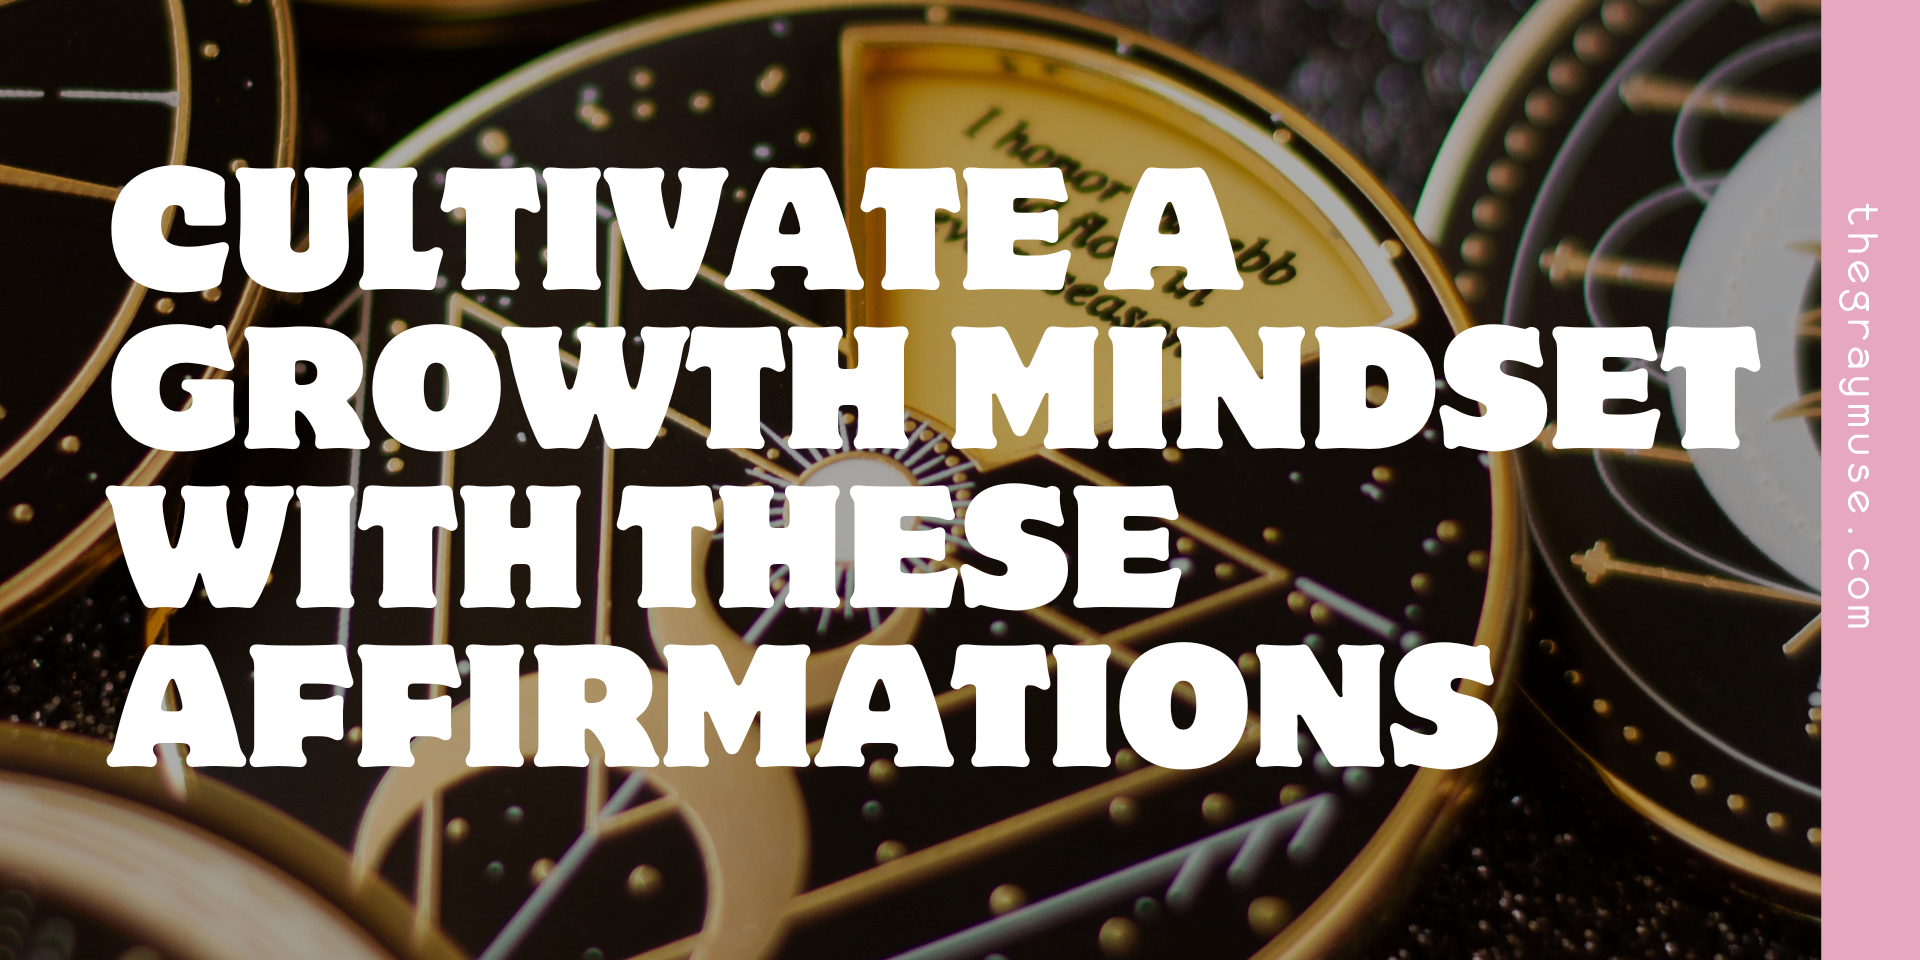 Cultivate a Growth Mindset with these Affirmations